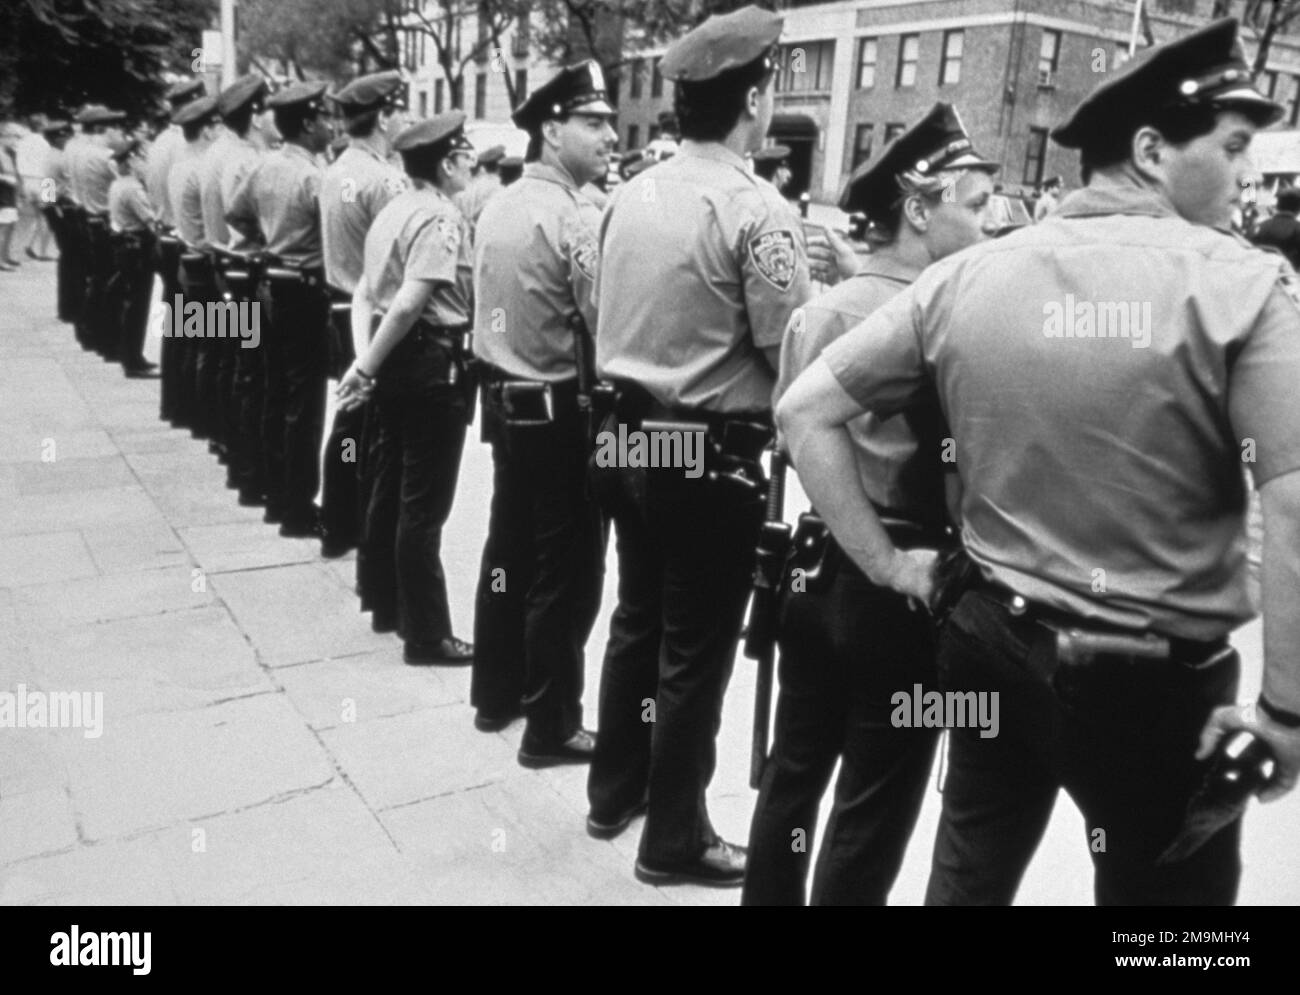 Black and white photograph of group of police officers standing on street side by side, New York City, USA Stock Photo